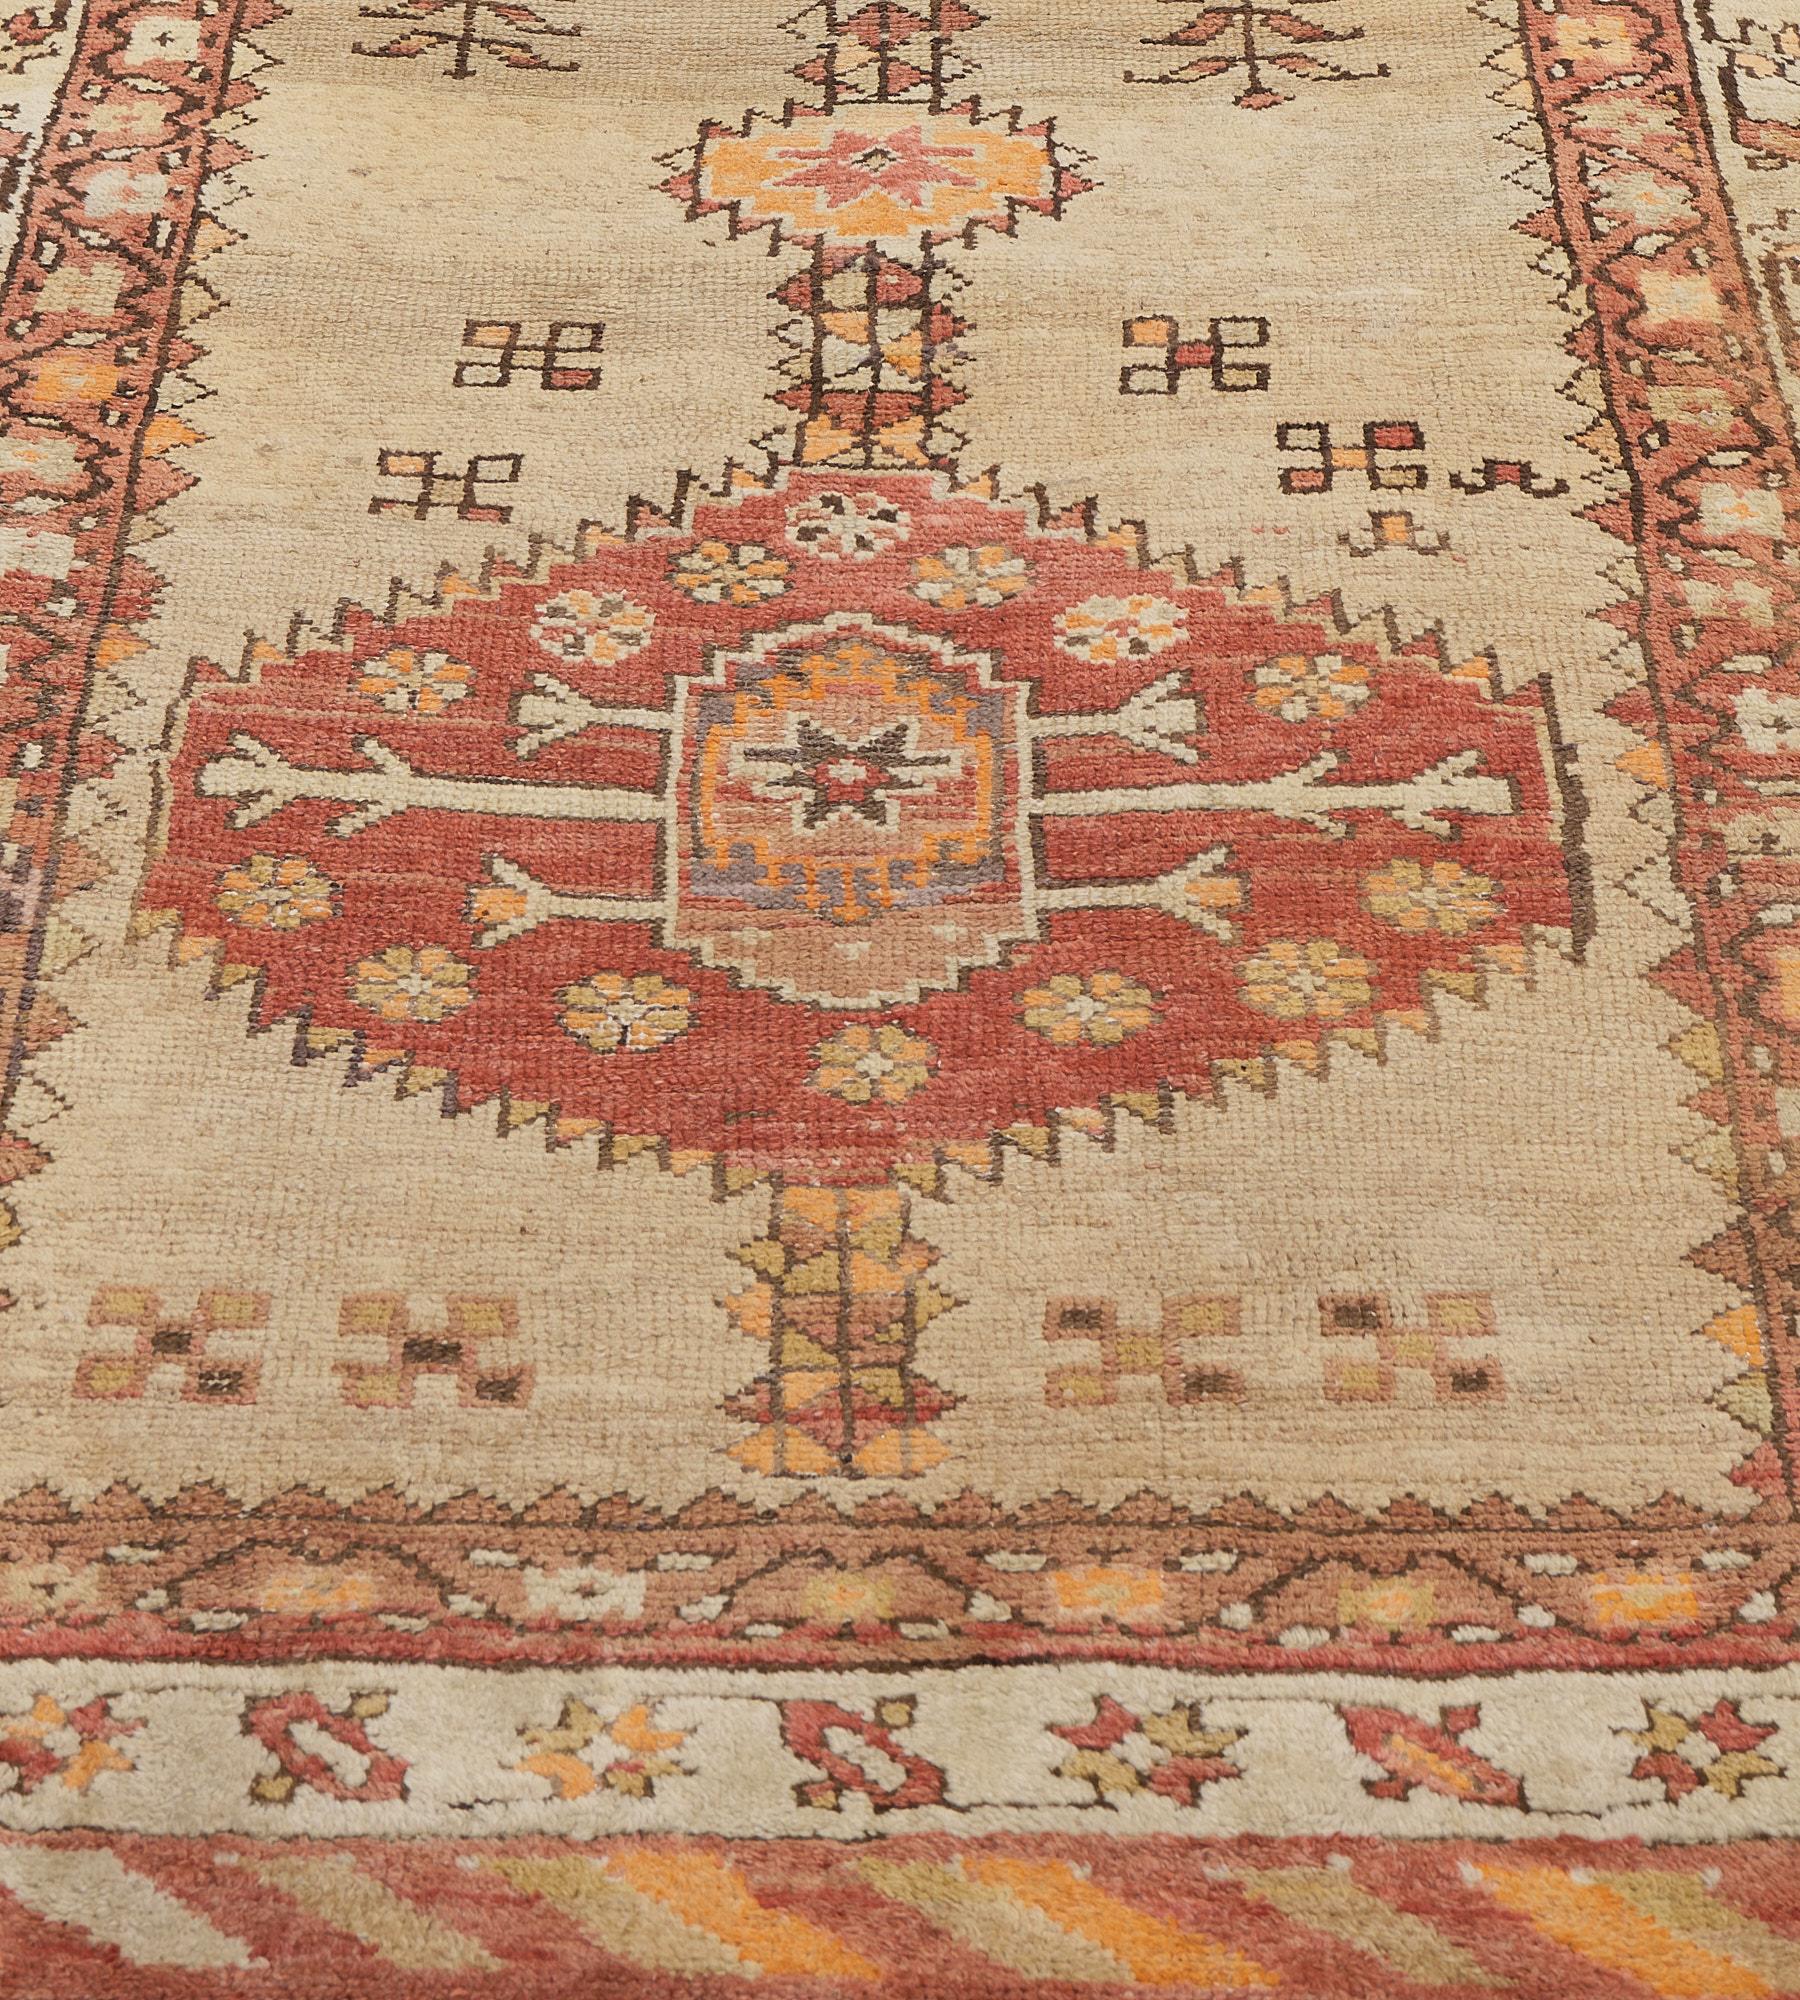 This antique Serab runner has a shaded camel-brown field scattered with floral stems and angular flowerheads around a central column of three linked terracotta-red and camel-brown serrated lozenges each containing a central floral lozenge surrounded